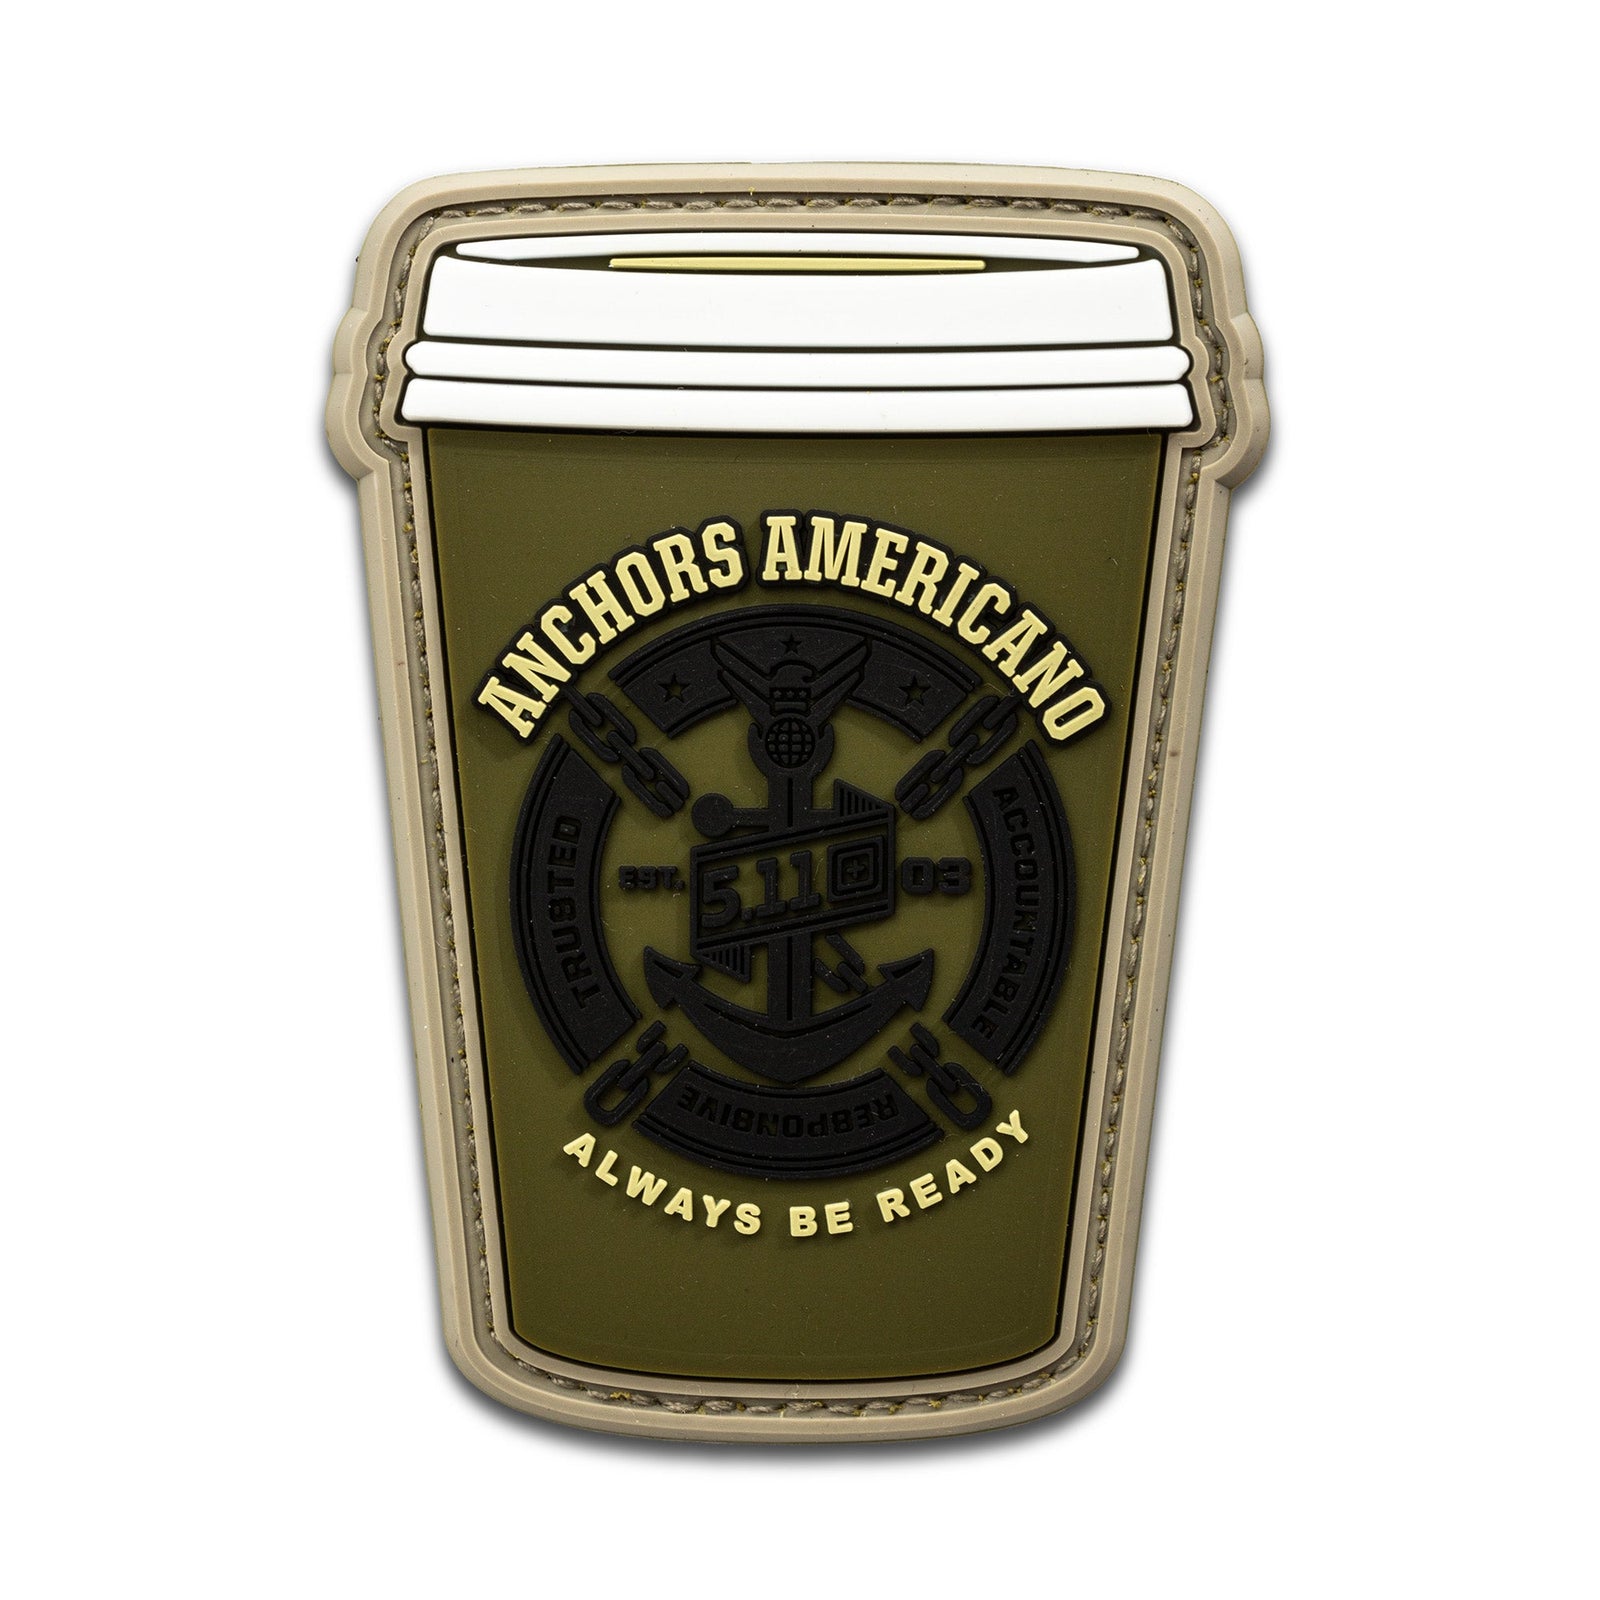 5.11 Tactical Anchors Americano Patch Gear Australia by G8